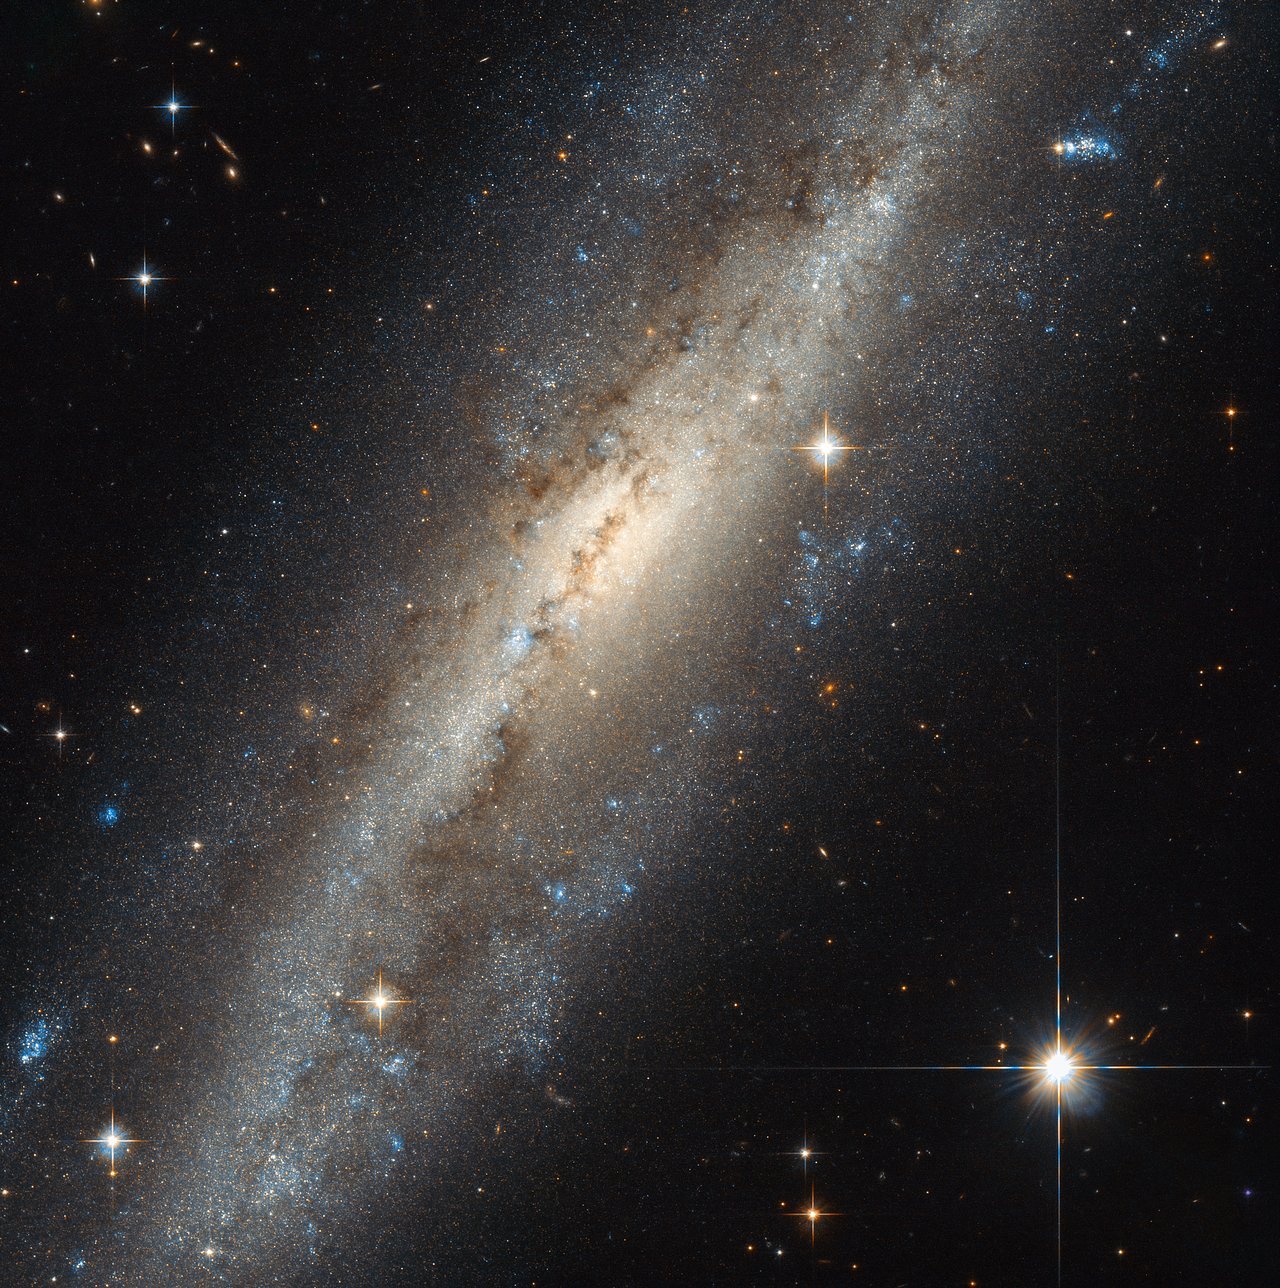 Hubble showed a spiral in the Andromeda galaxy - Hubble telescope, Space, Andromeda